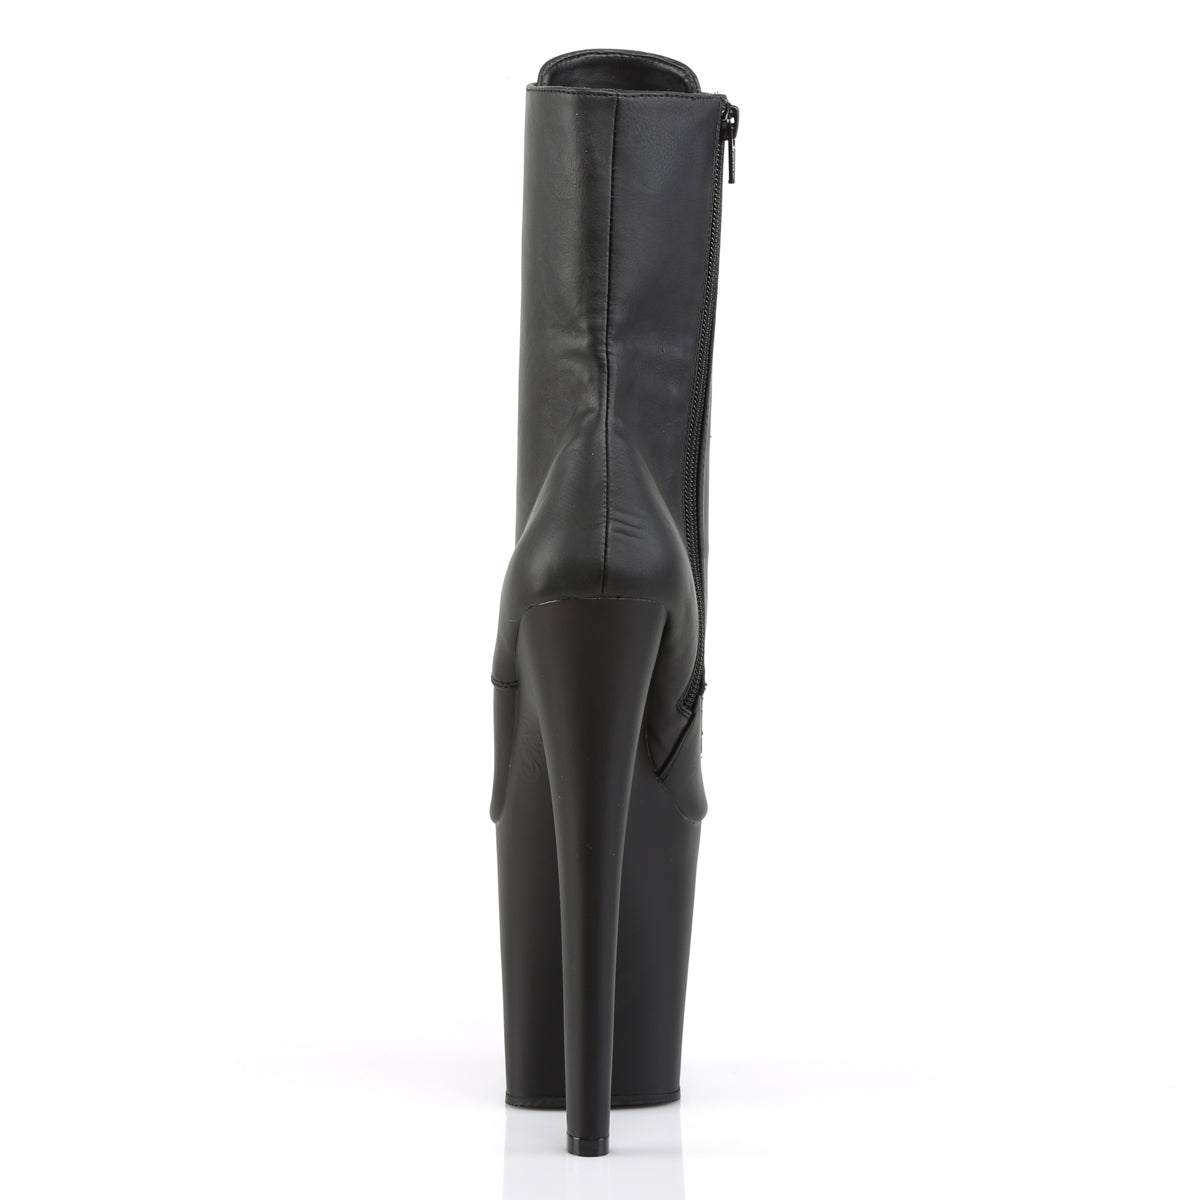 XTREME-1020 Black Faux Leather Boot Pleaser